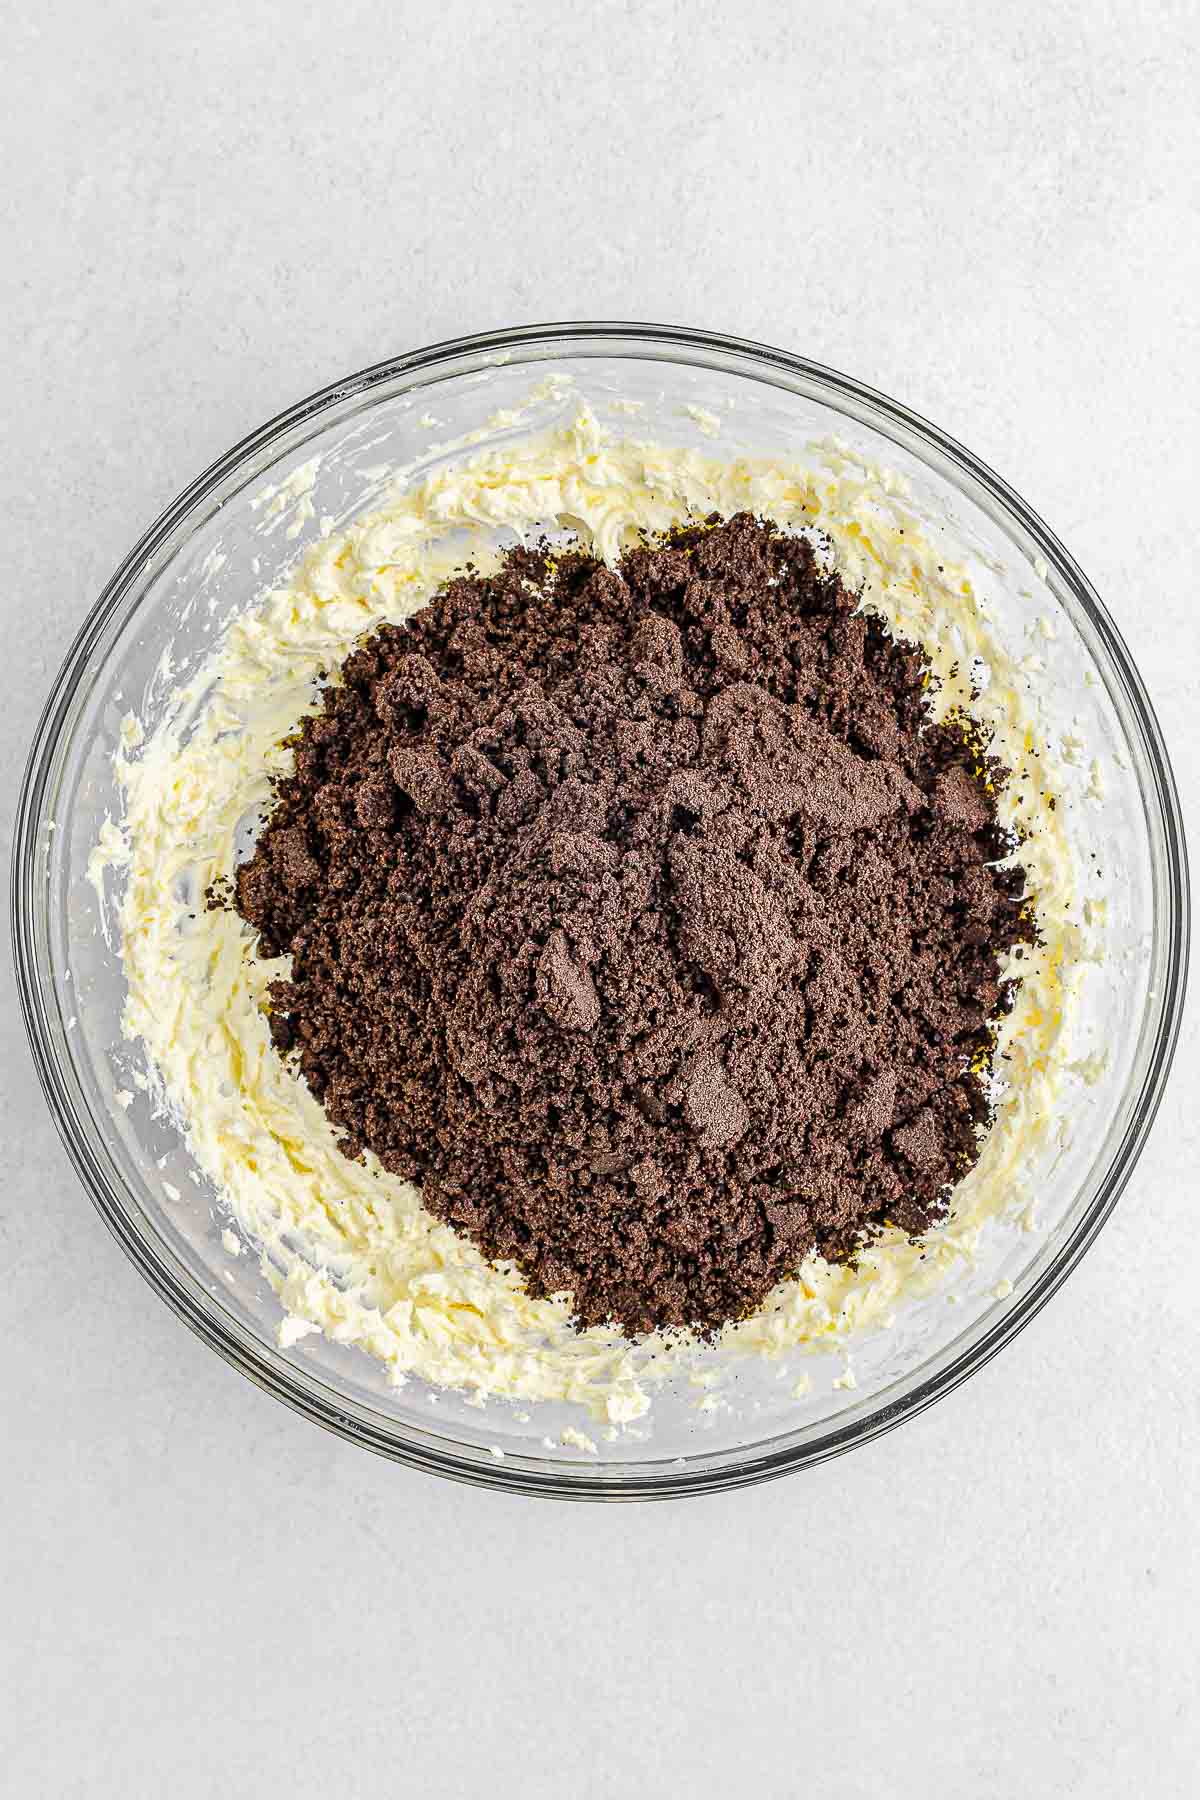 Crumpled oreo added to cream cheese in large glass mixing bowl.